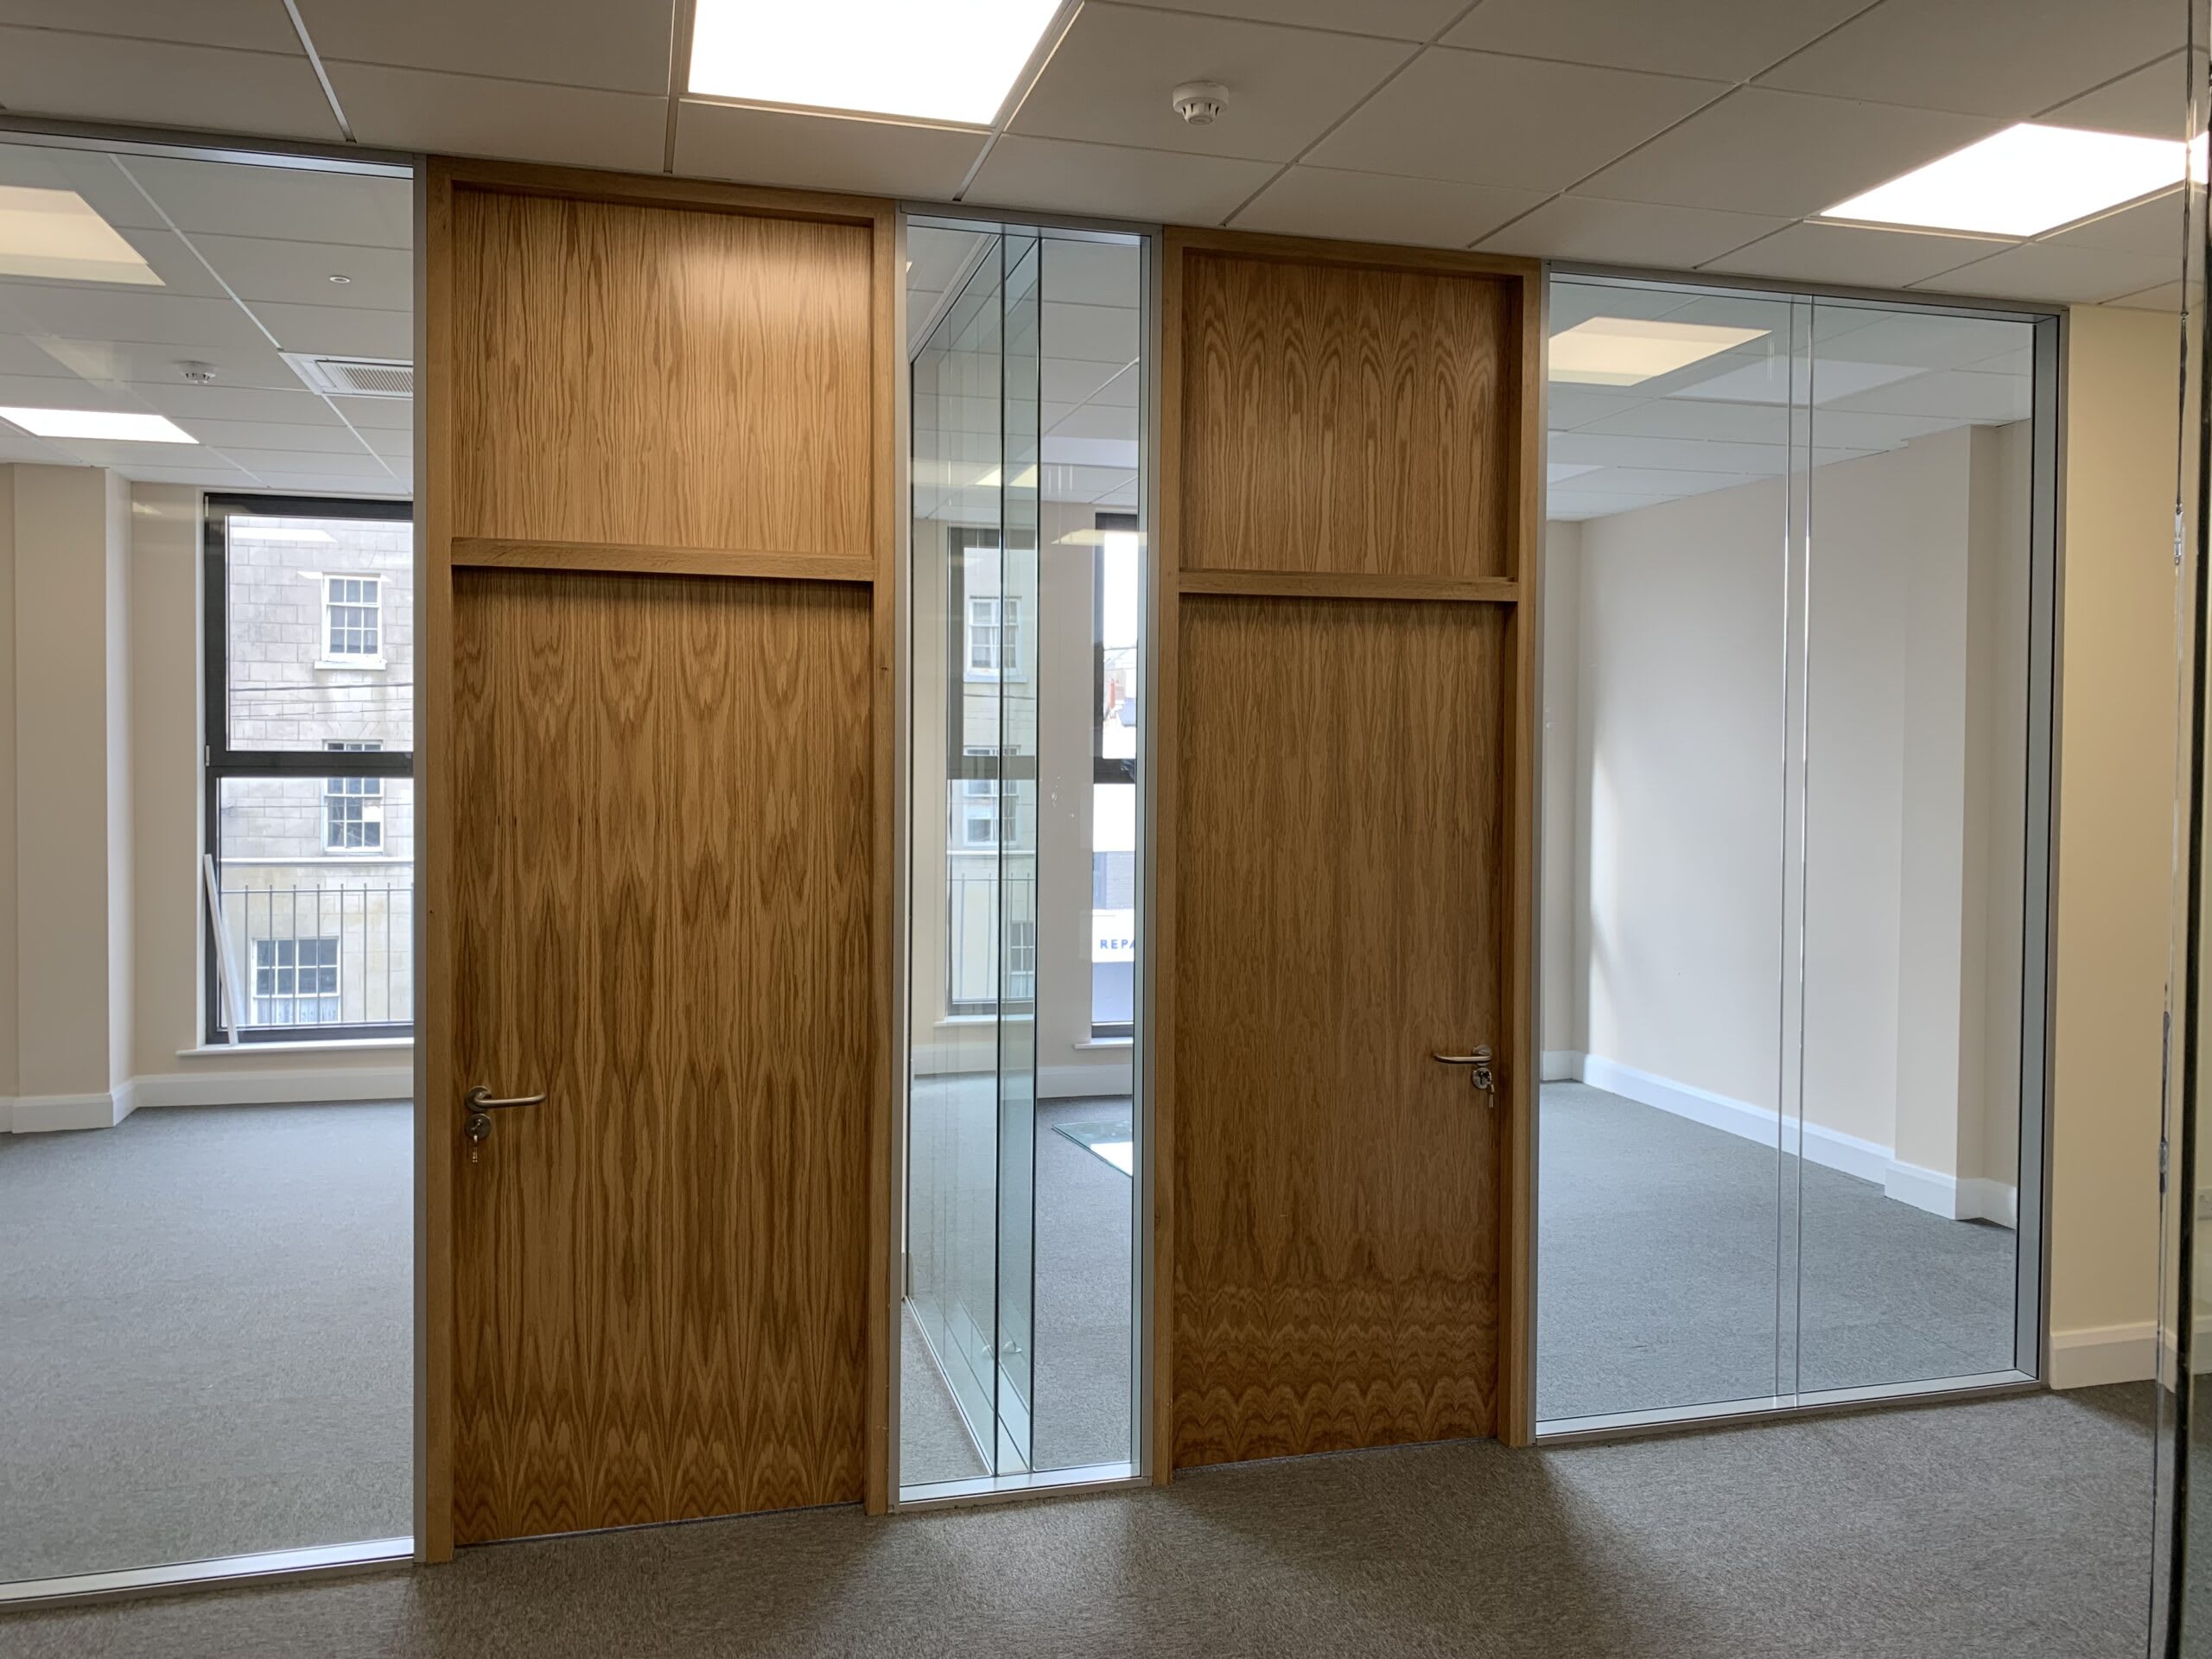 MABS OFFICES CLONMEL